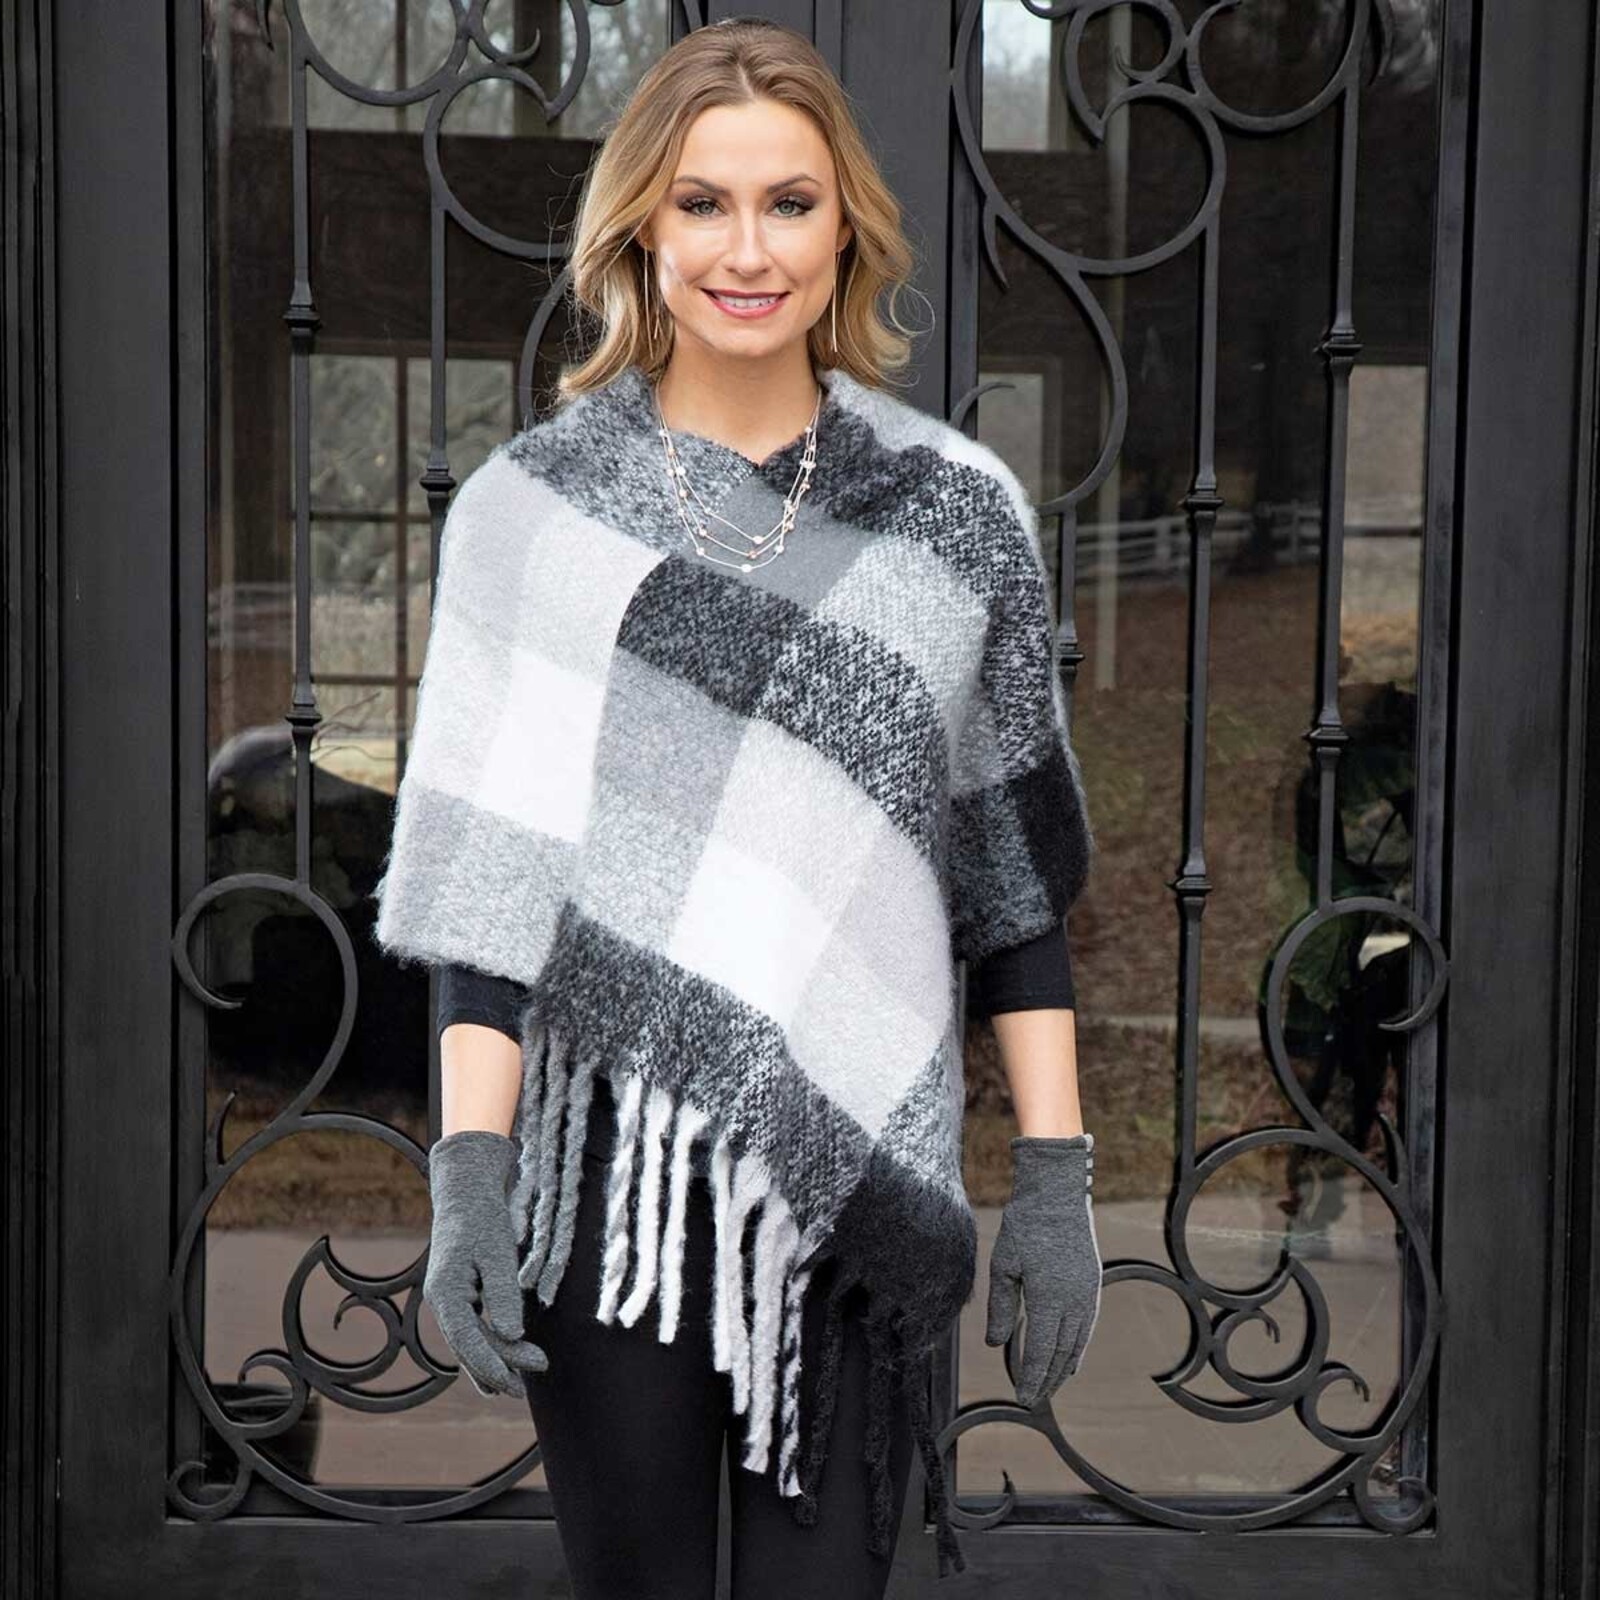 Meravic Black and Grey Plaid Knit Poncho with Fringe 34"x36" S6095 loading=